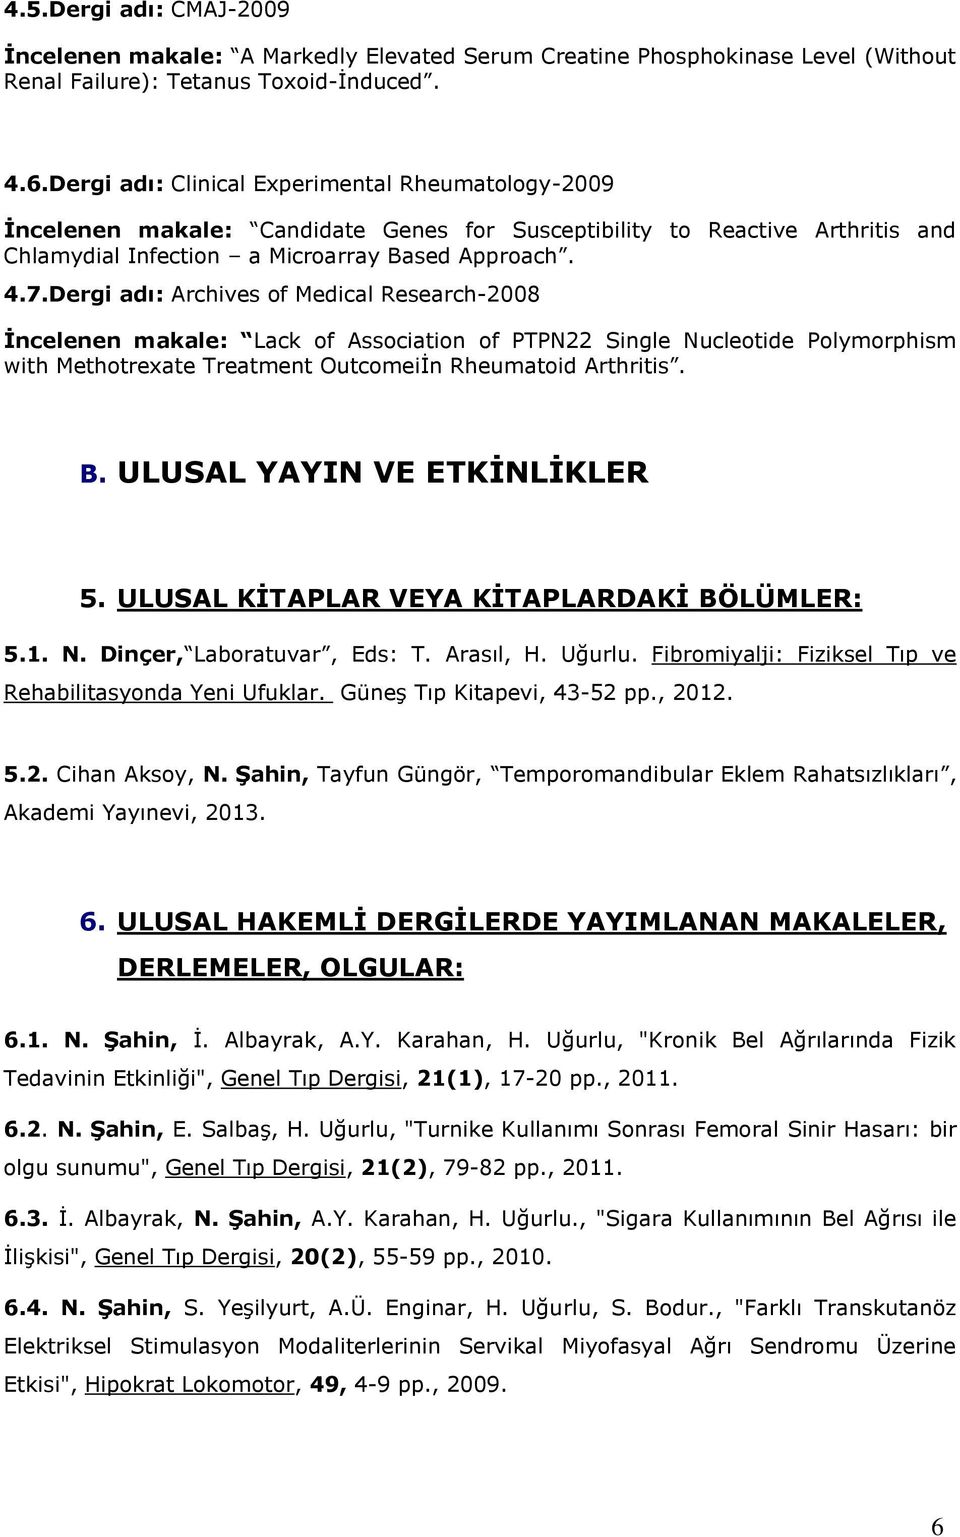 Dergi adı: Archives of Medical Research-2008 İncelenen makale: Lack of Association of PTPN22 Single Nucleotide Polymorphism with Methotrexate Treatment Outcomeiİn Rheumatoid Arthritis. B.